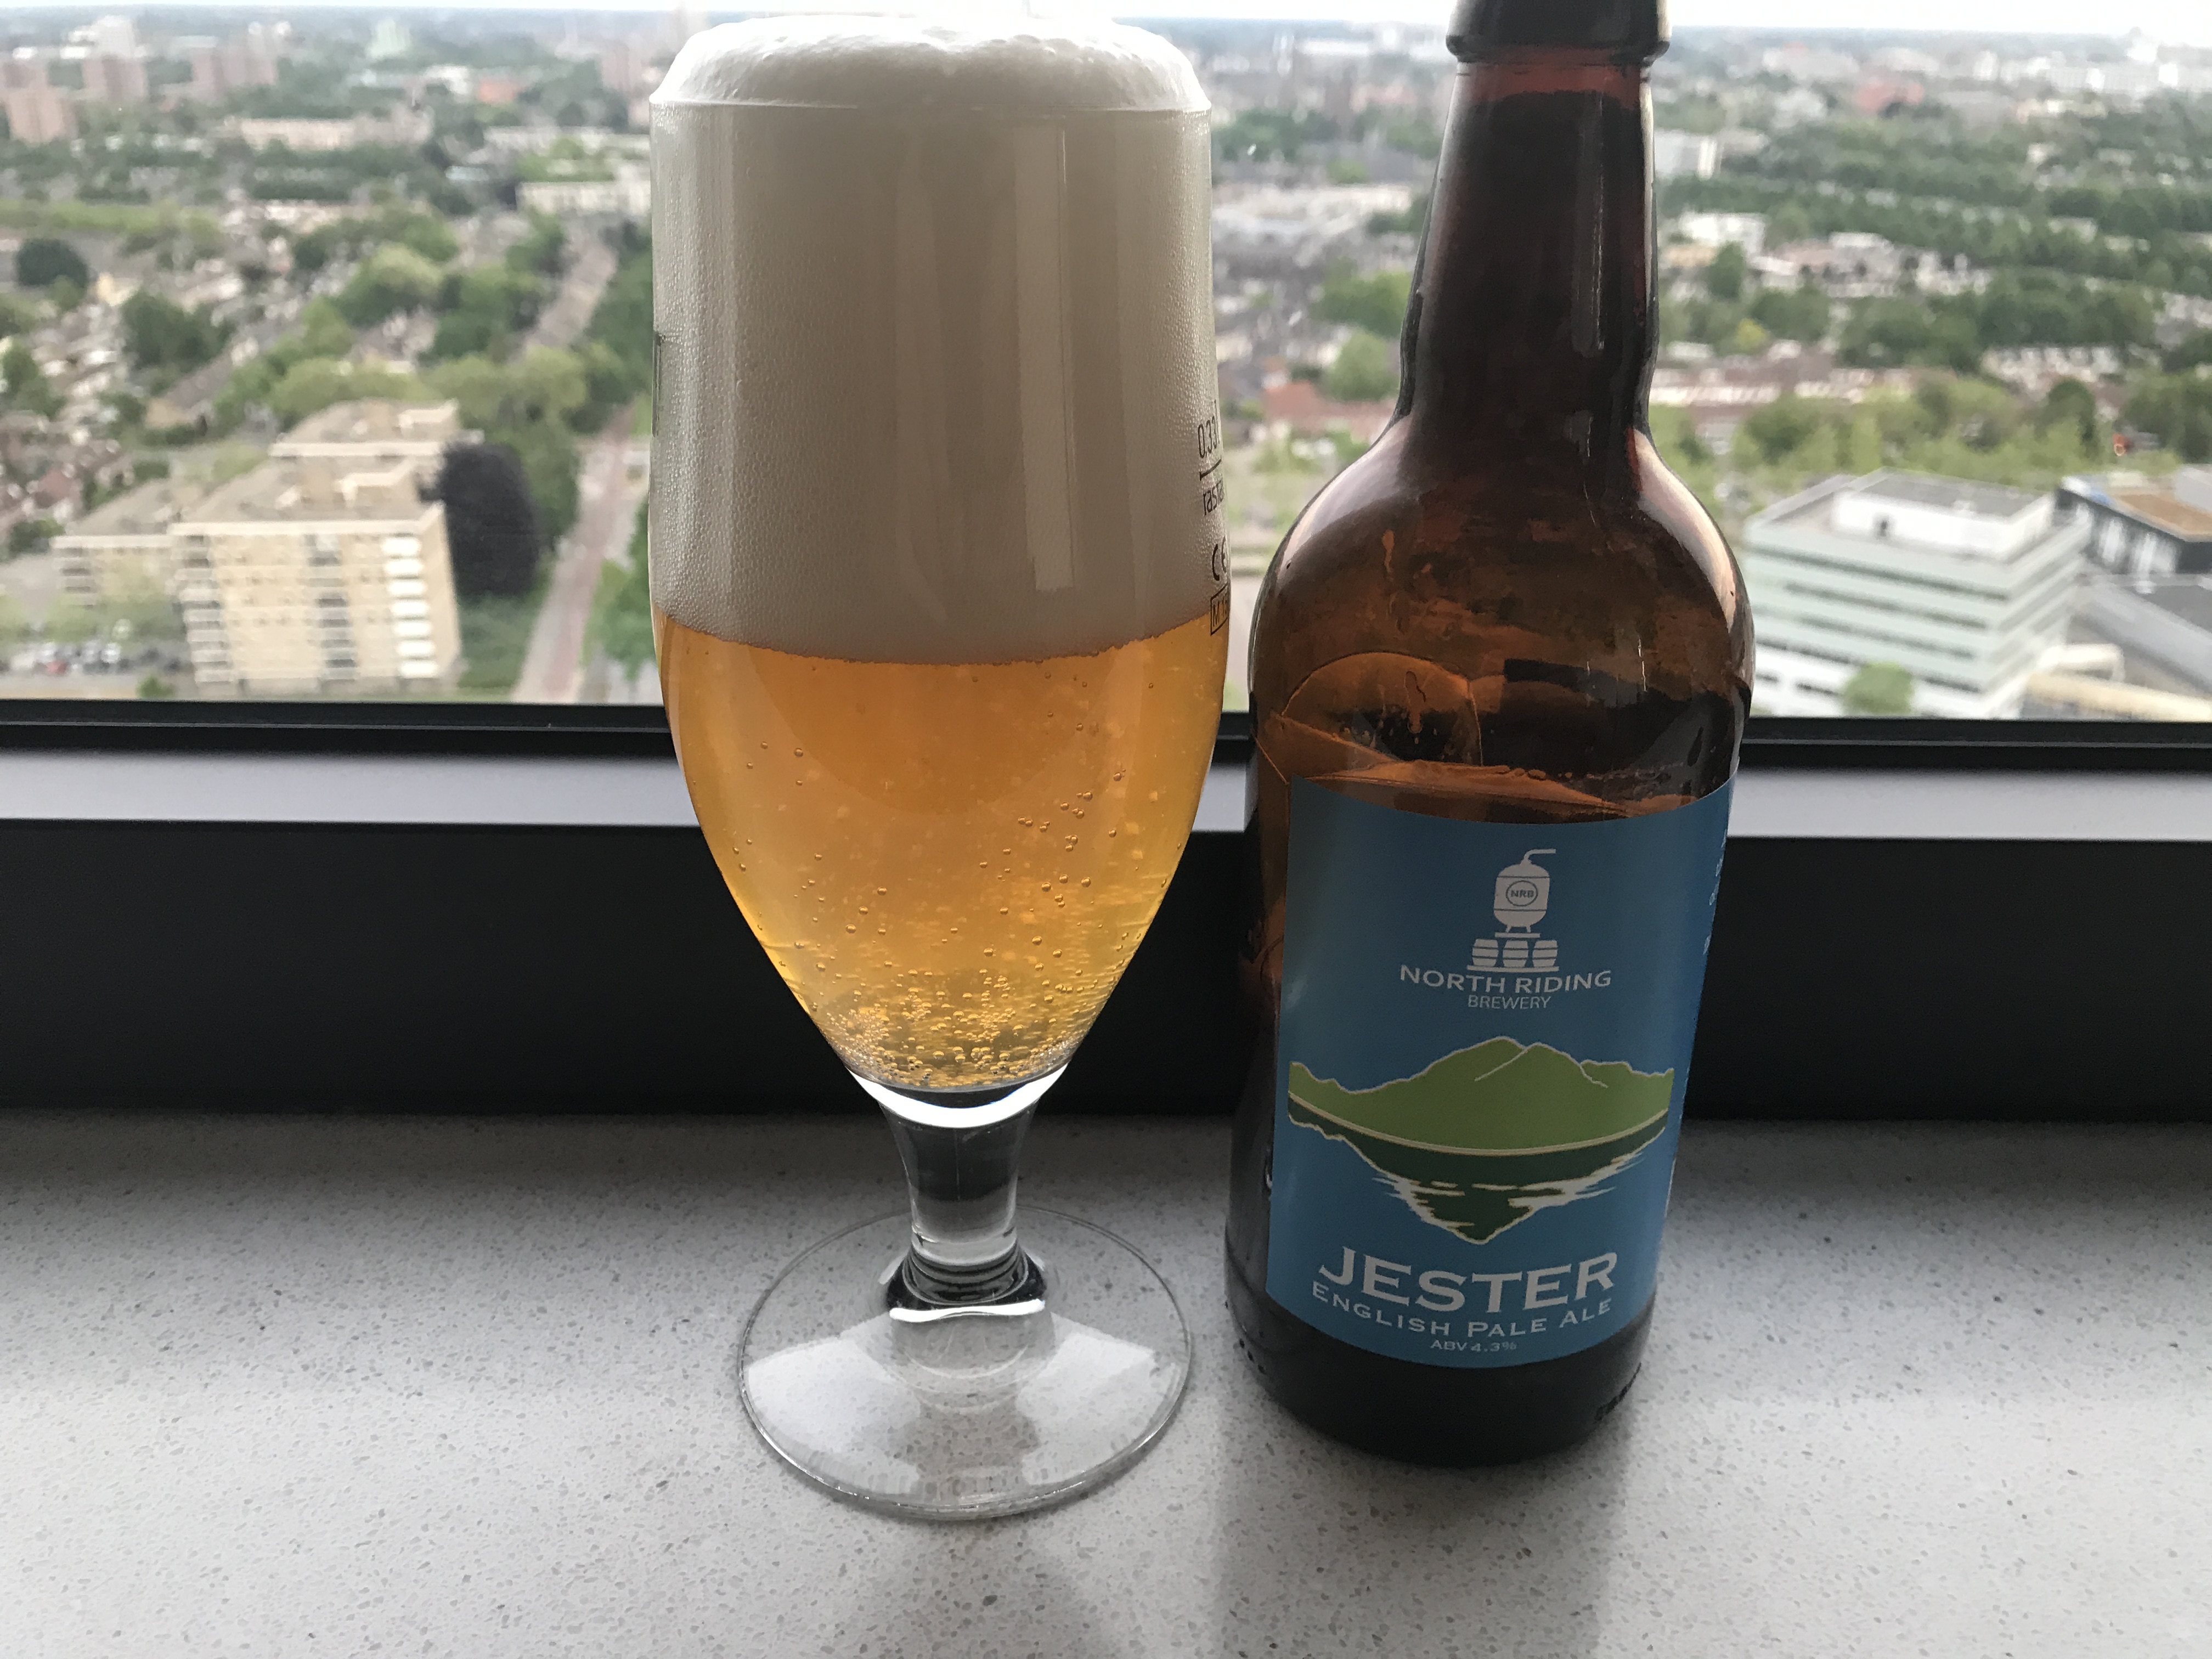 Jester by North Riding Brewery